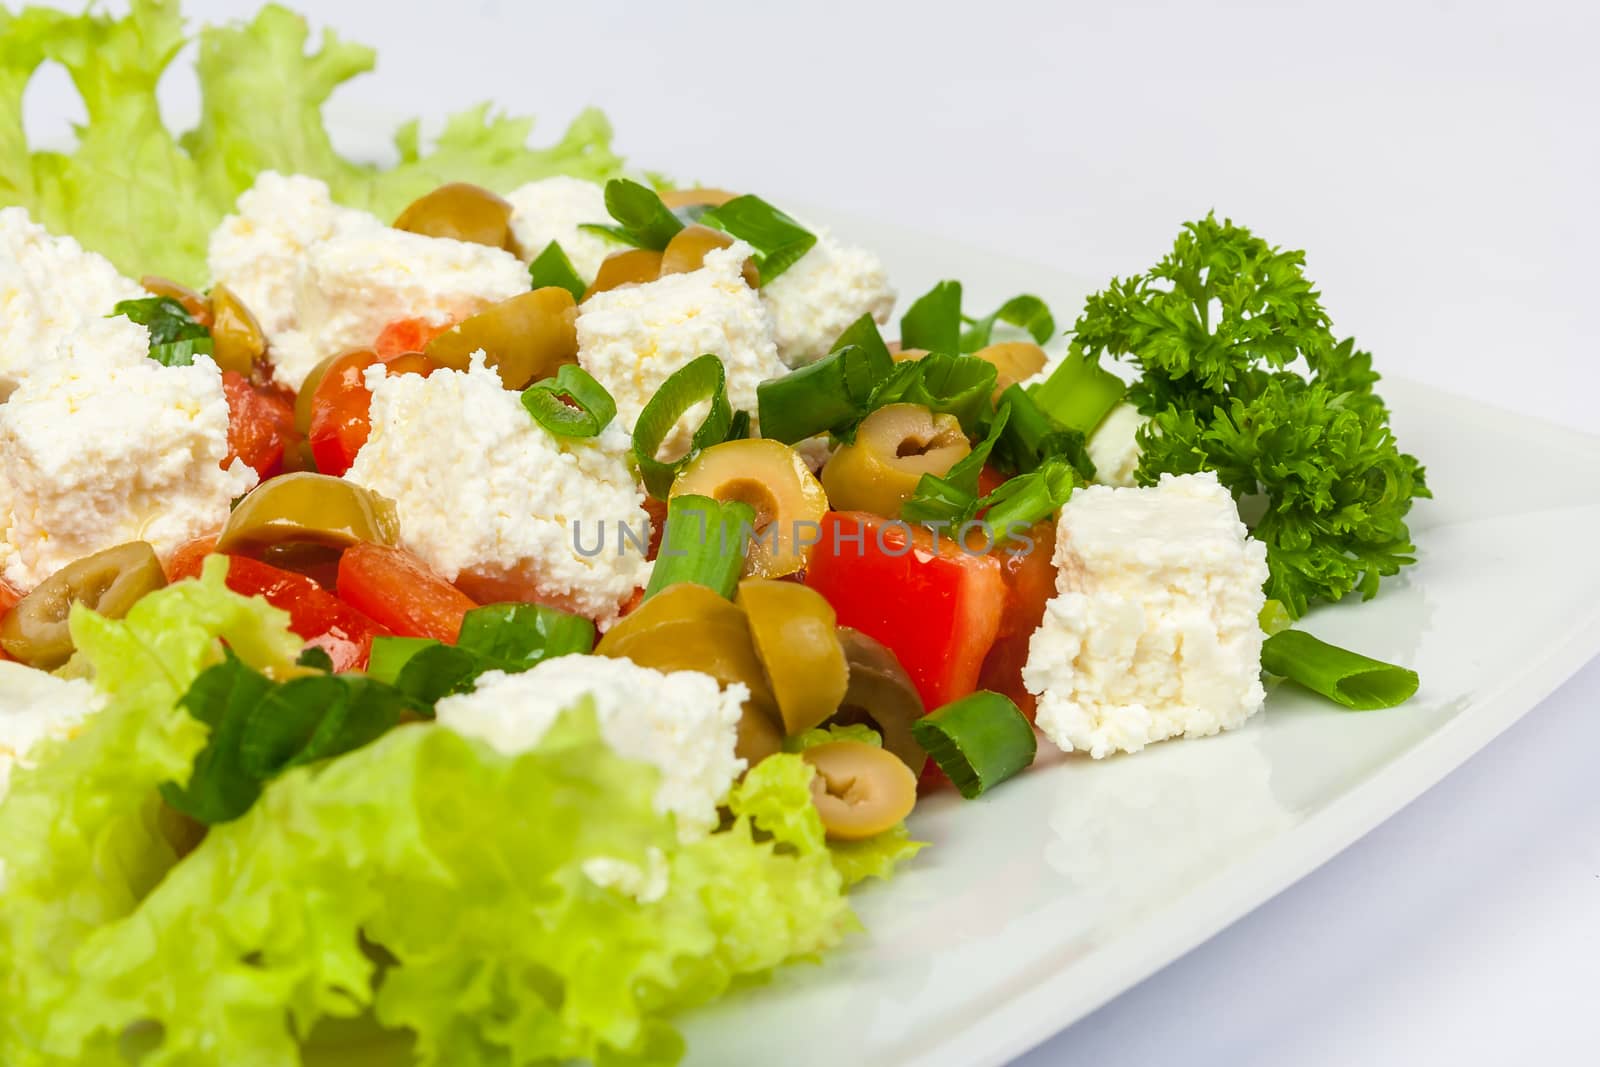 salad with olives and feta by Pellinni